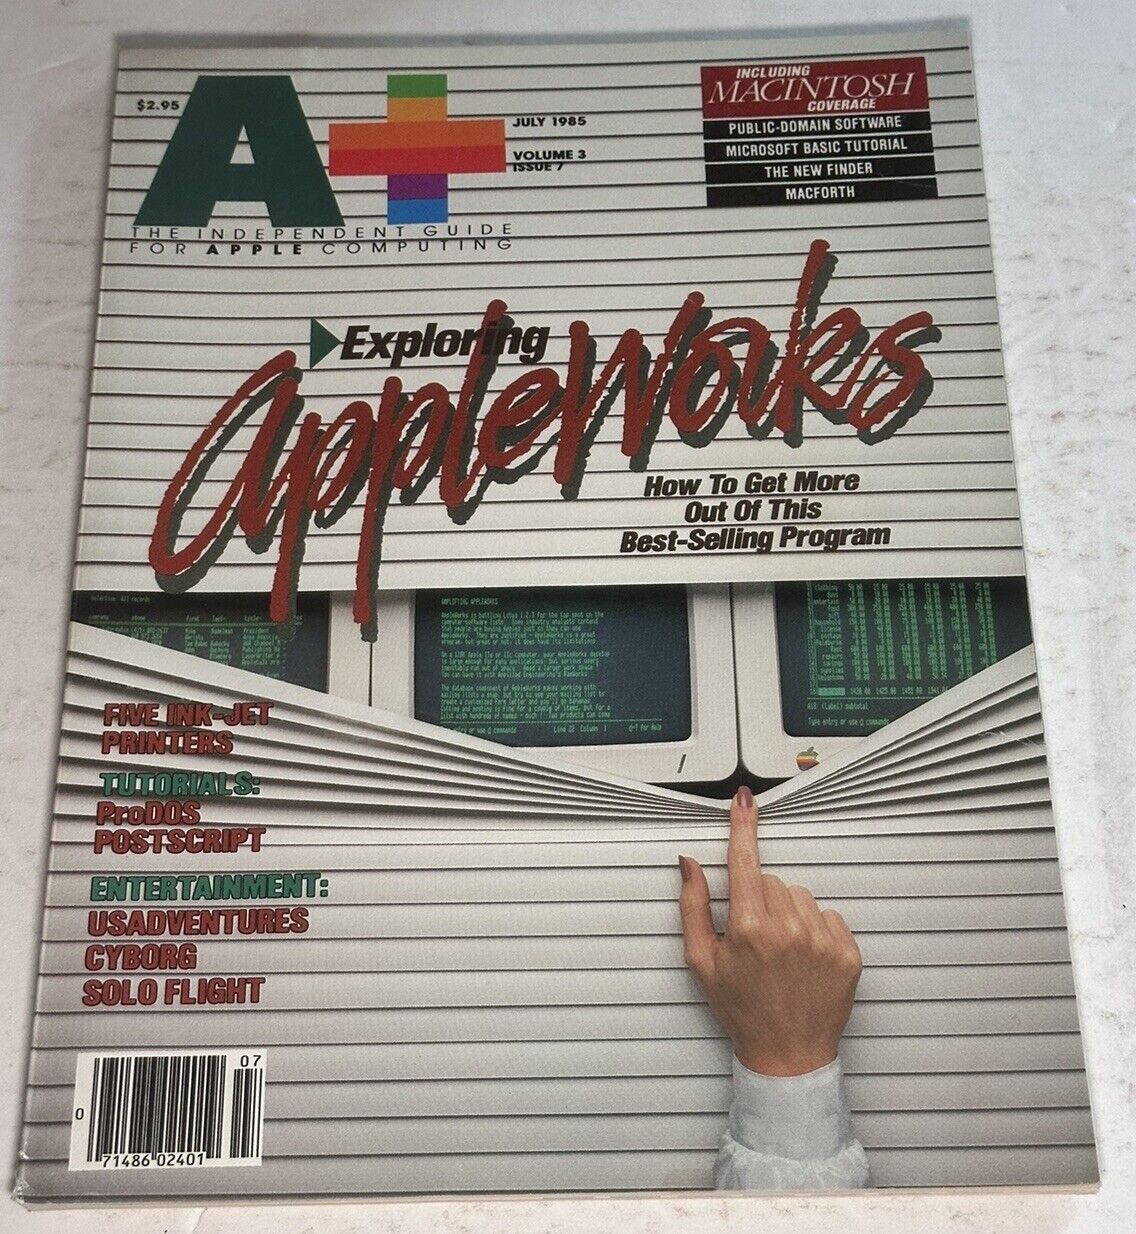 A+ The Independent Guide For Apple Computing July 1985 Vol. 5 Issue 7 AppleWorks